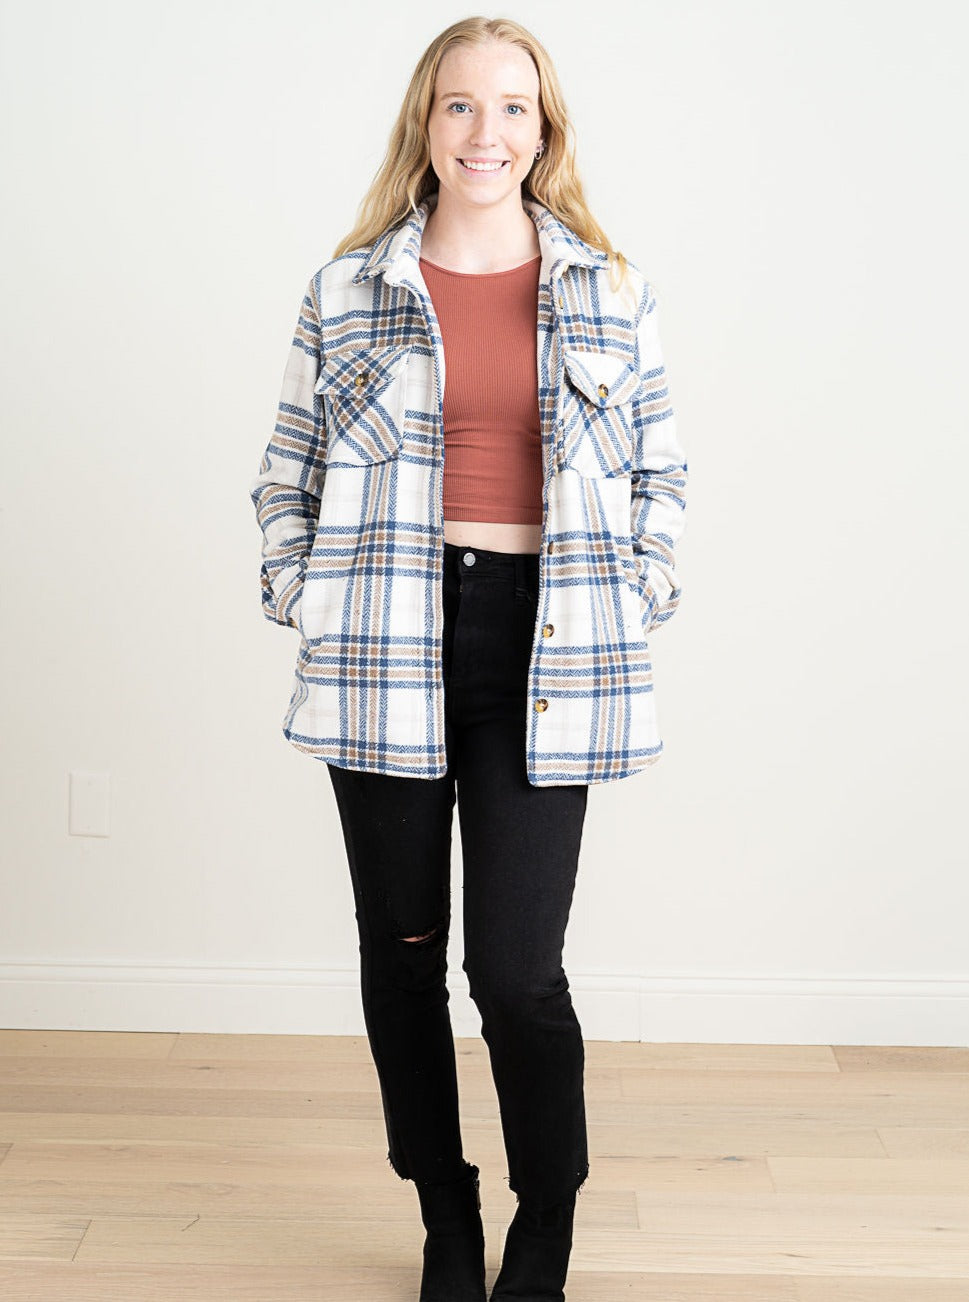 This super soft shacket is the perfect go-to for any outfit.   Details:  Shacket Button front closure   Dual front pockets  Dual side pockets Measurements for a size small:  Length: 31